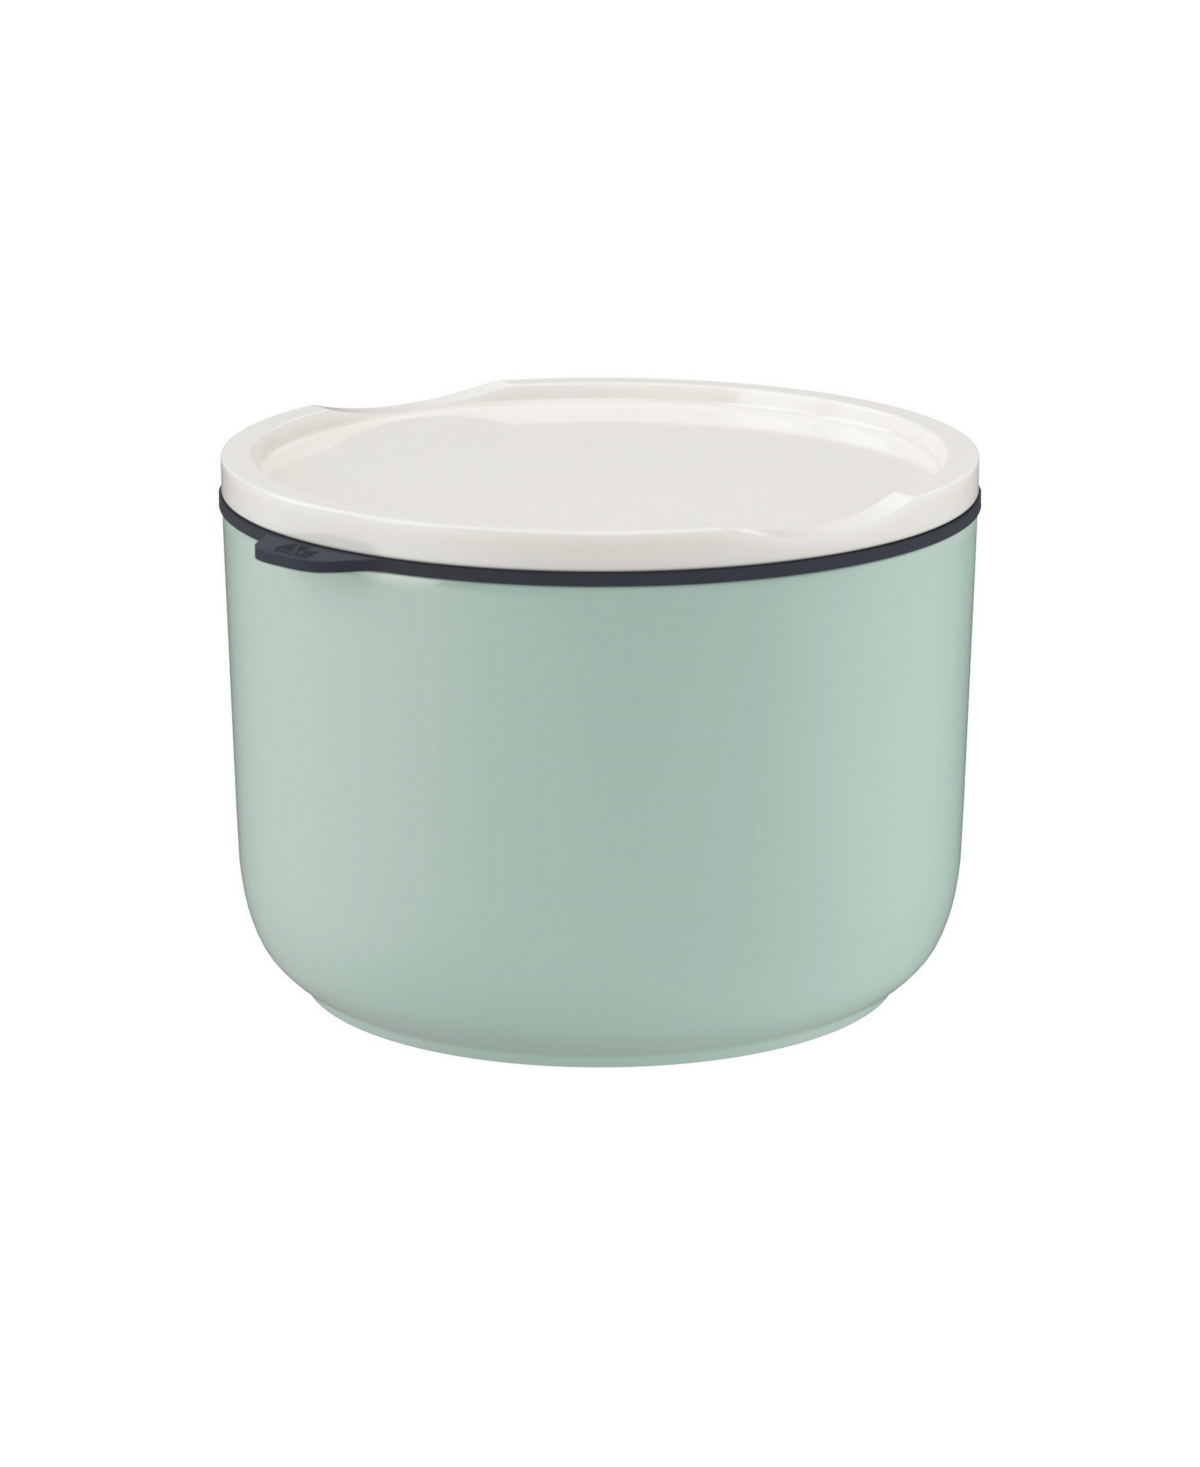 Large Lunch Box Round Mineral - Mineral Green